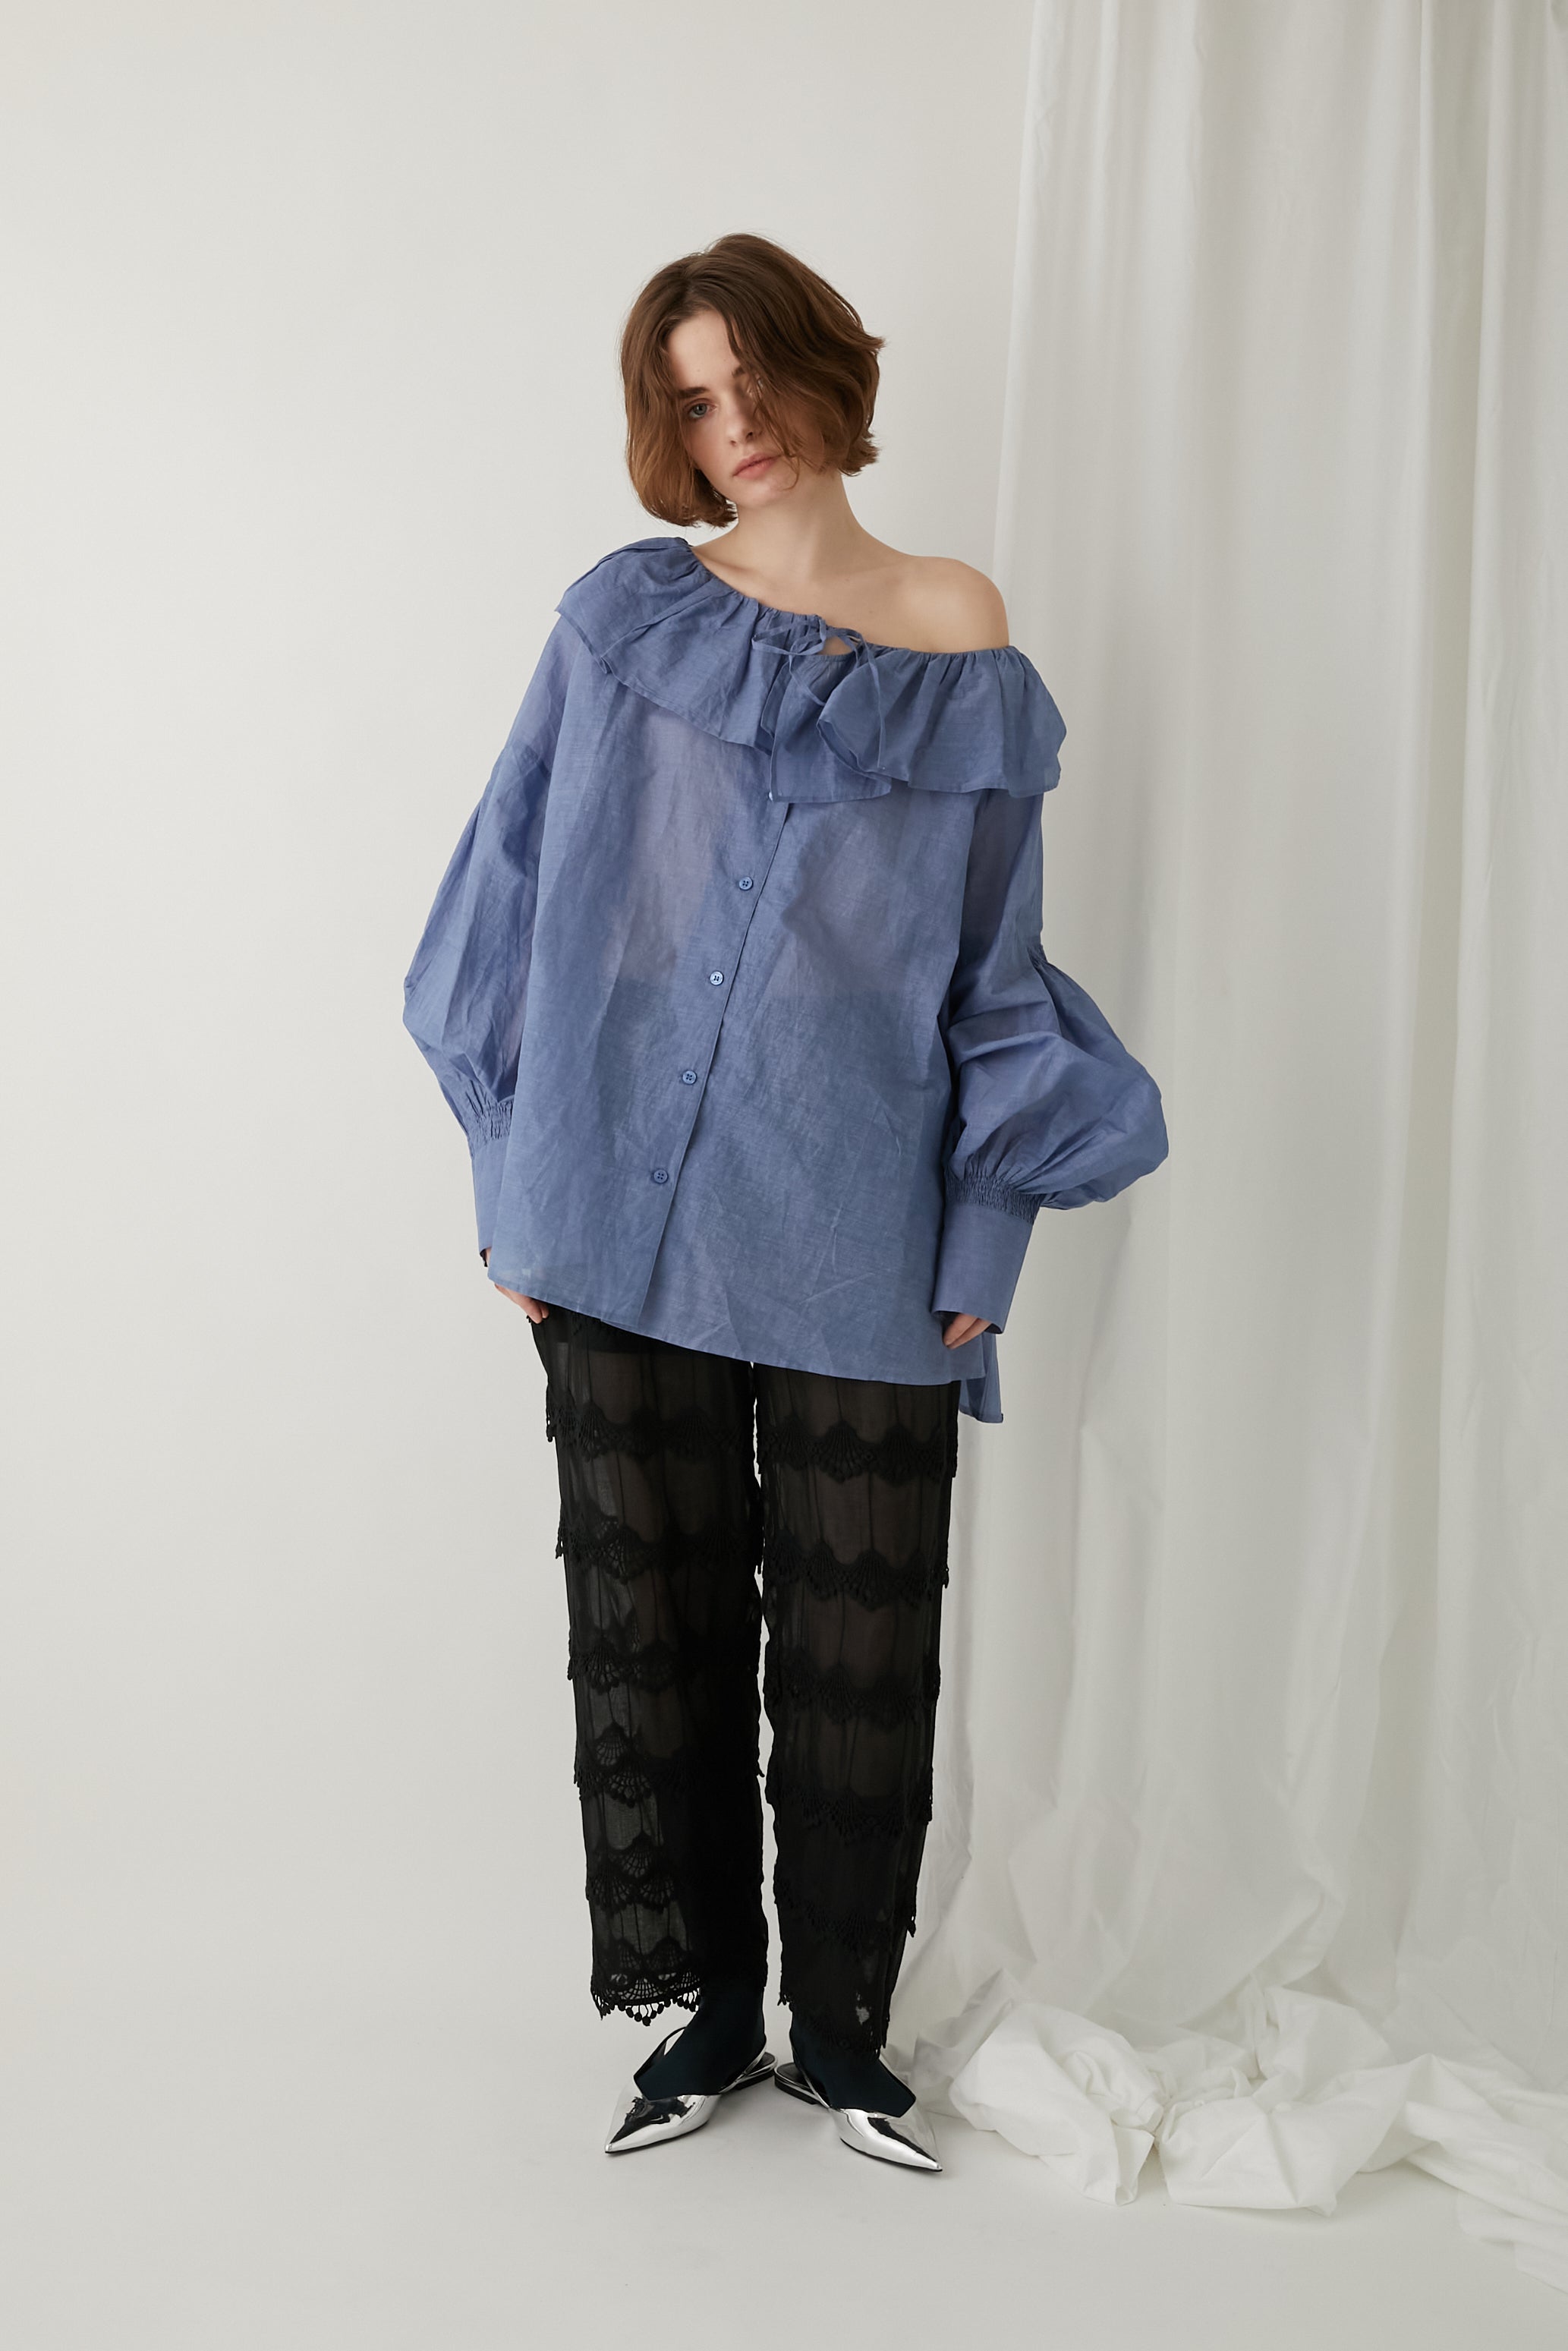 sheer cotton flare blouse │ BLUE